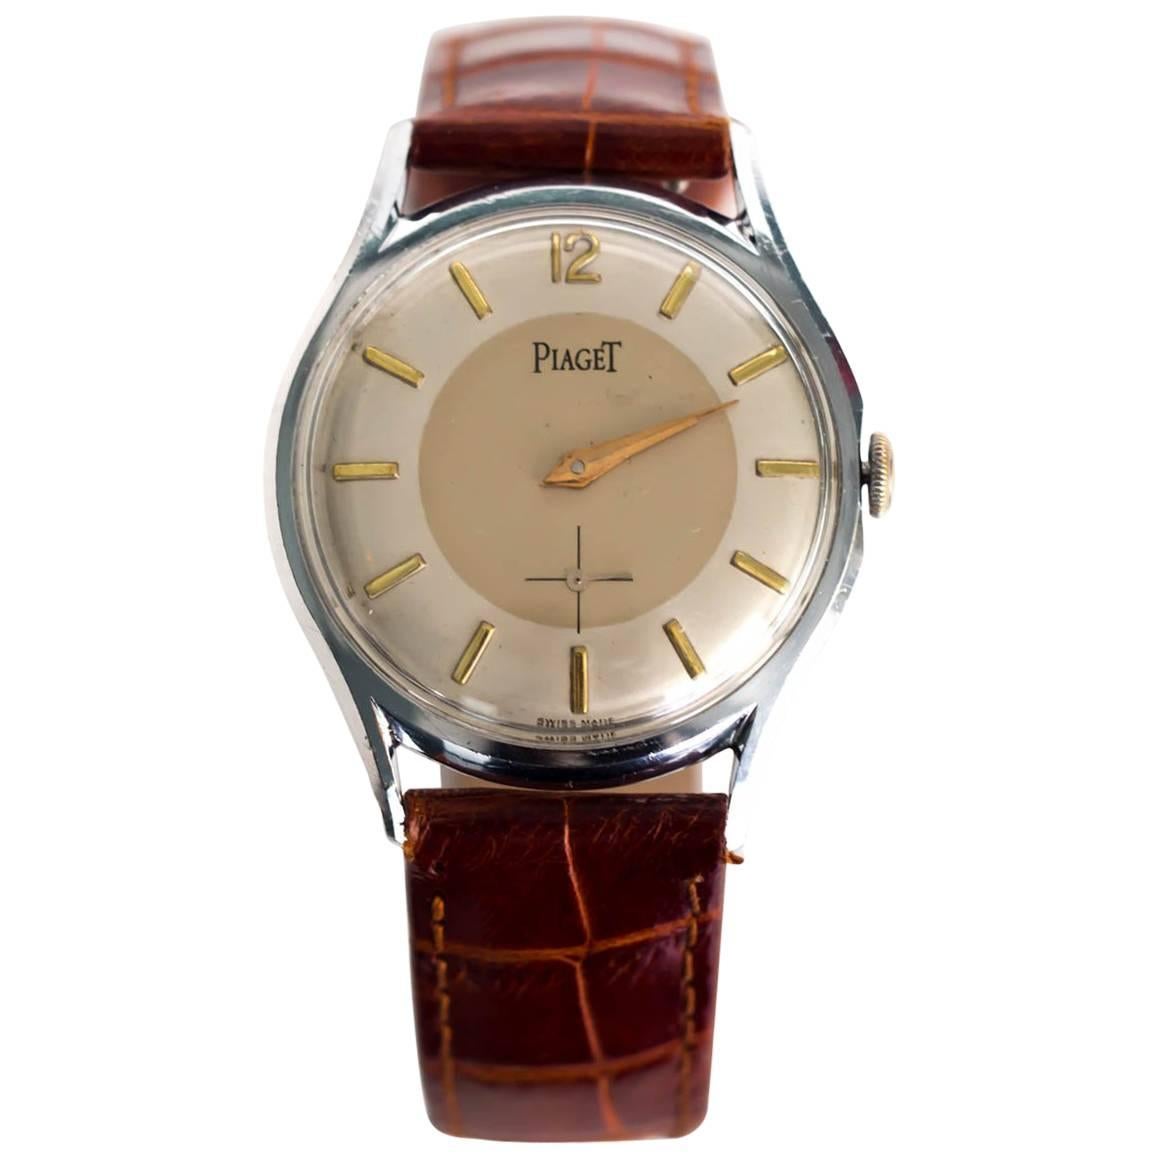 Piaget Stainless Steel Manual Wind Wristwatch 